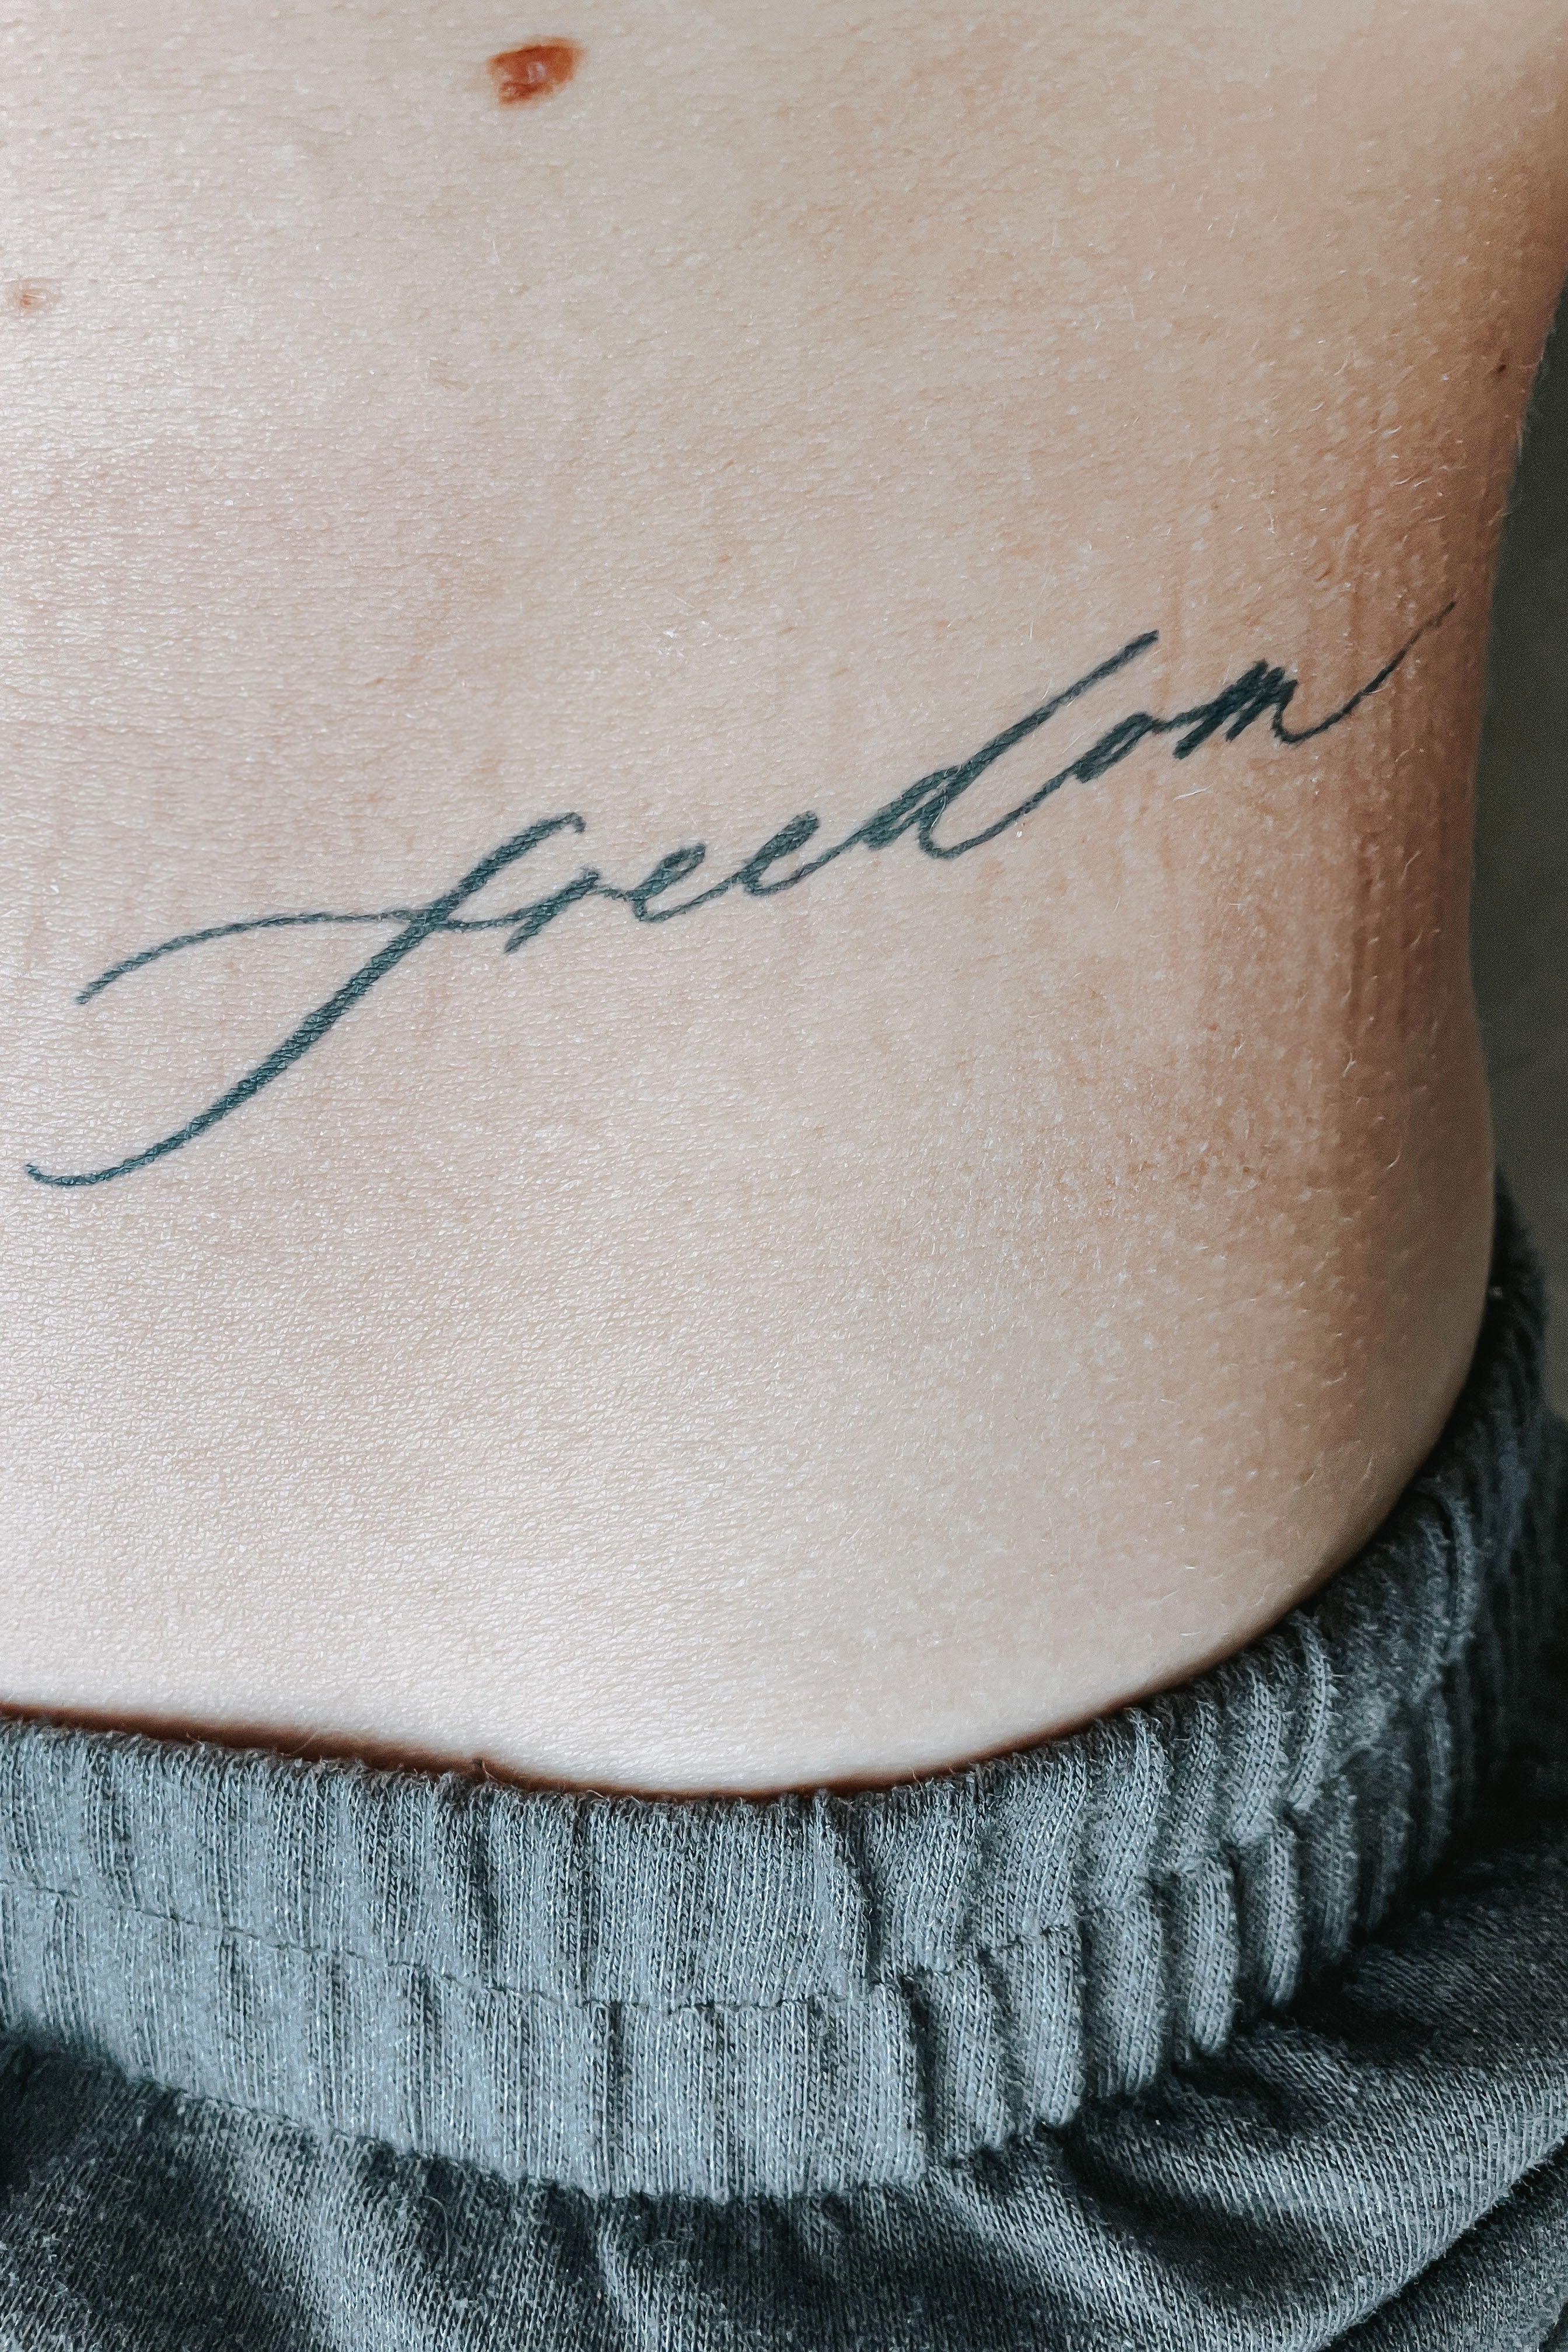 Freedom Calligraphy Tattoo – Written Word Calligraphy and Design